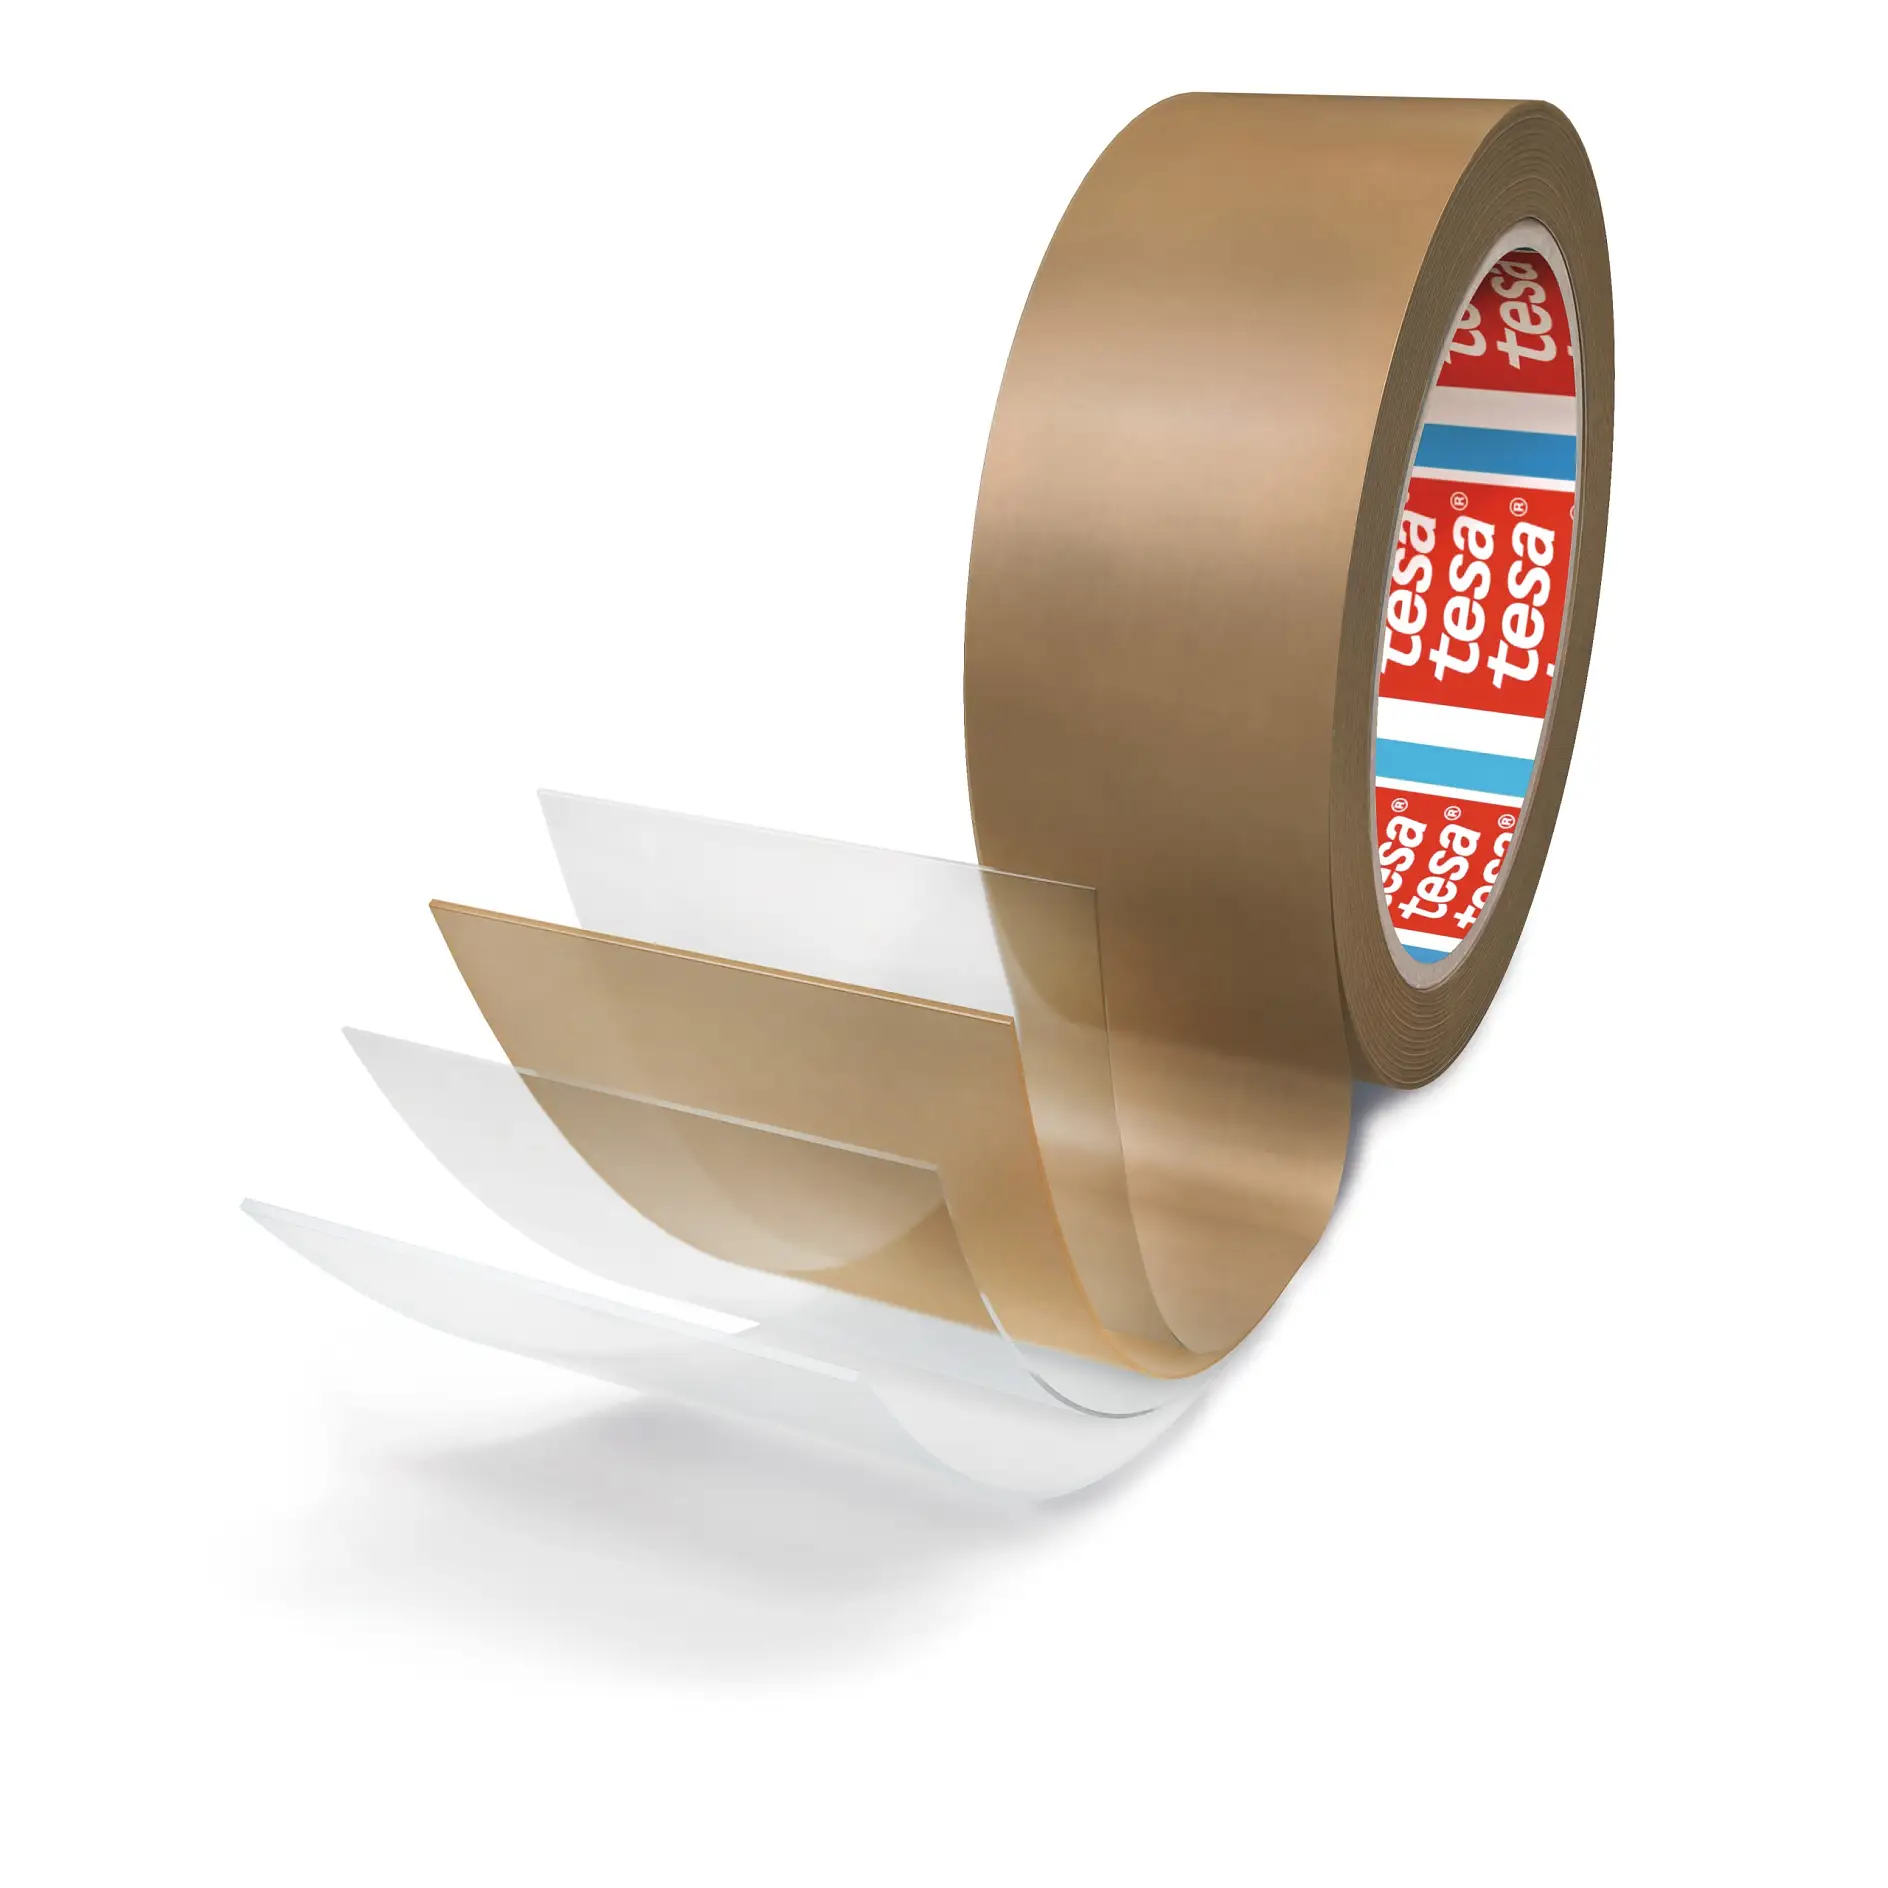 tesa_Structure-single-sided-packaging-tape_72dpi